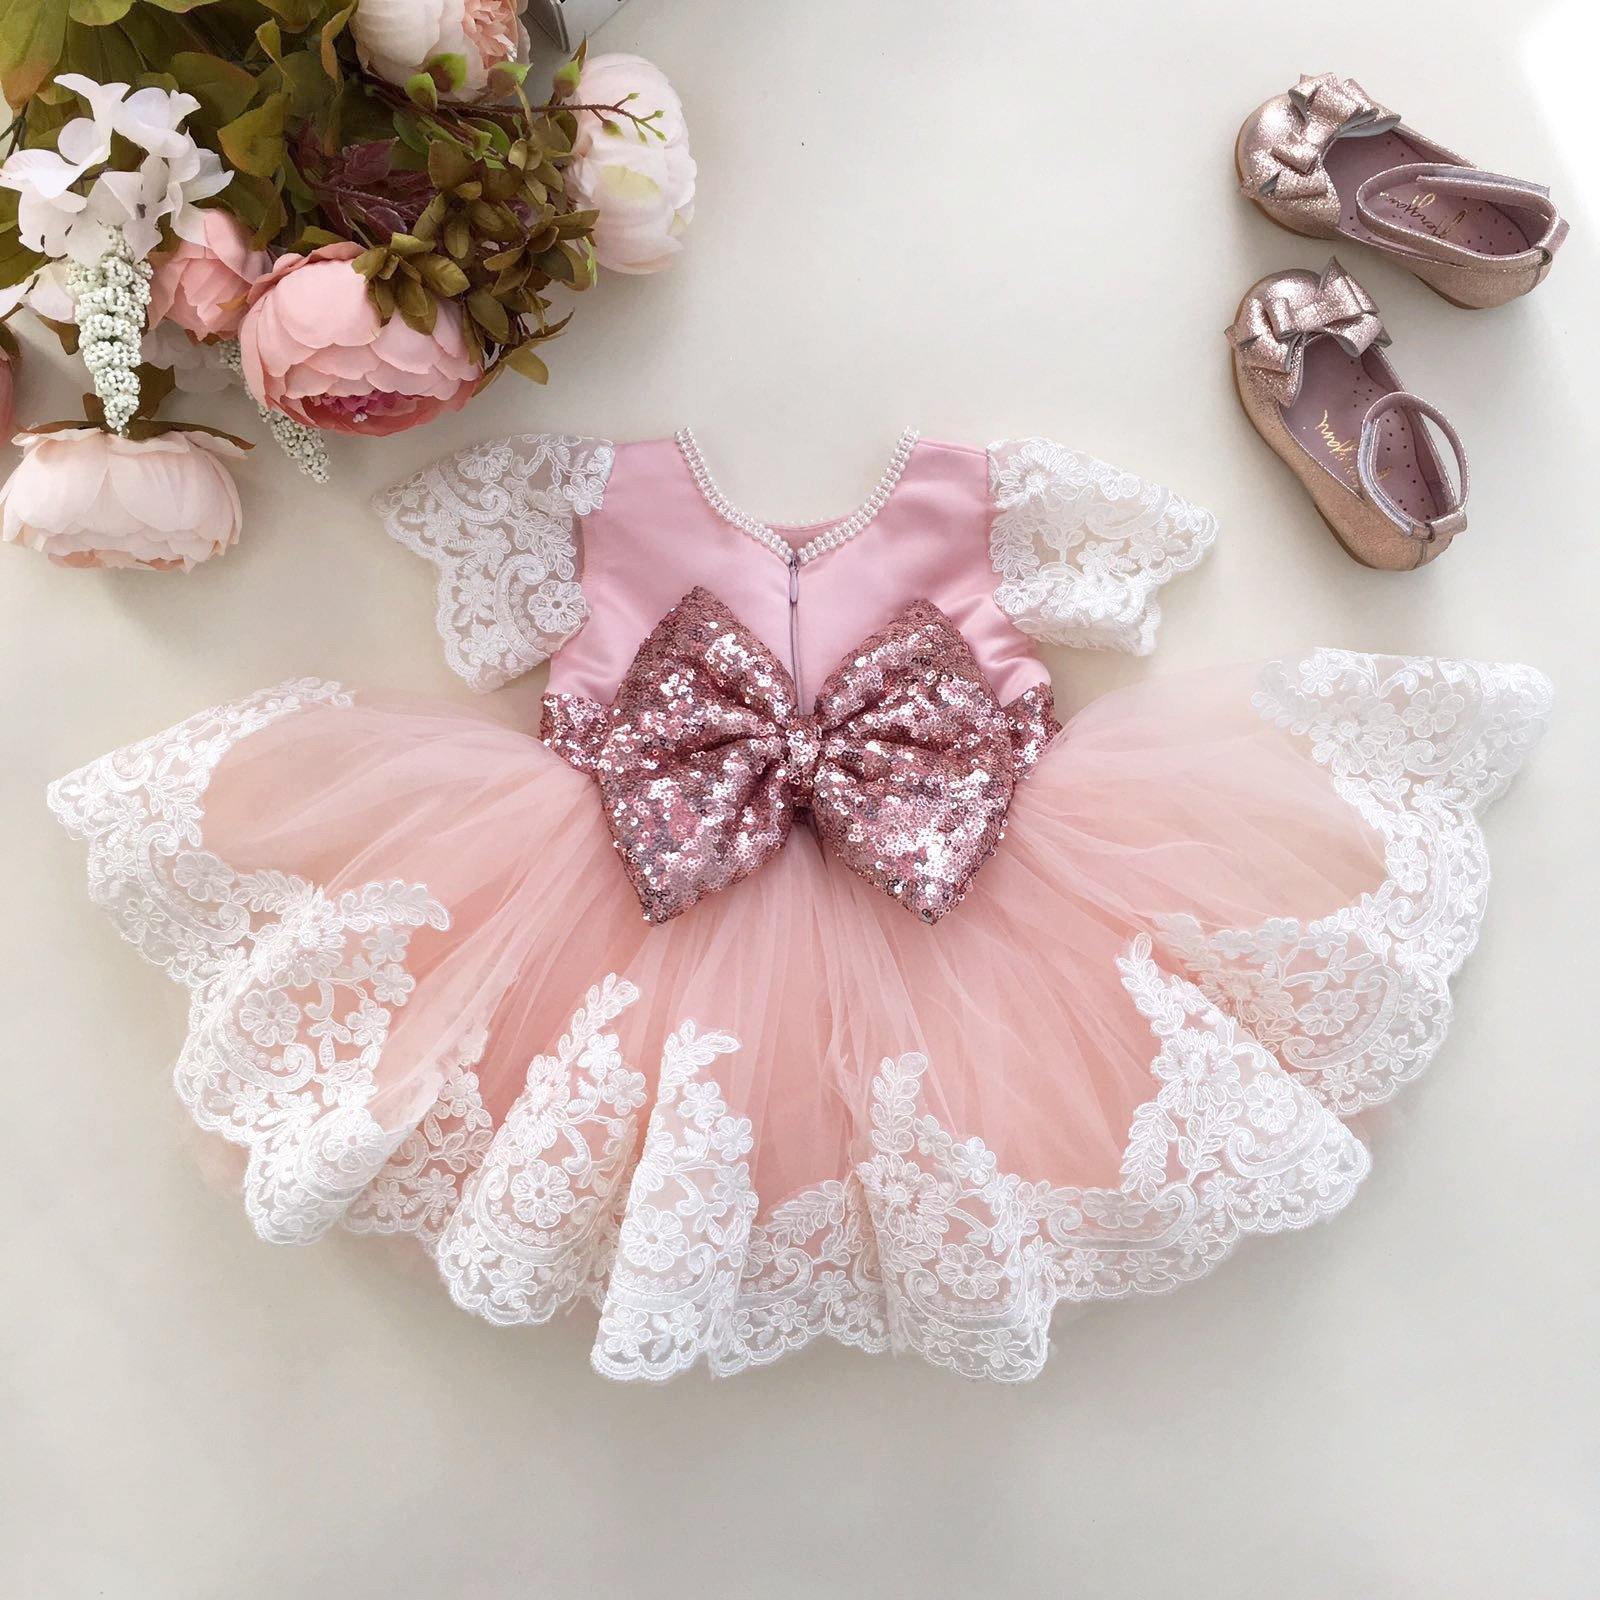 Girl Party Wear Western Baby Girl Party Dress For 2 Years Old Children  Frocks Designs Girls Dresses - Dresses - AliExpress